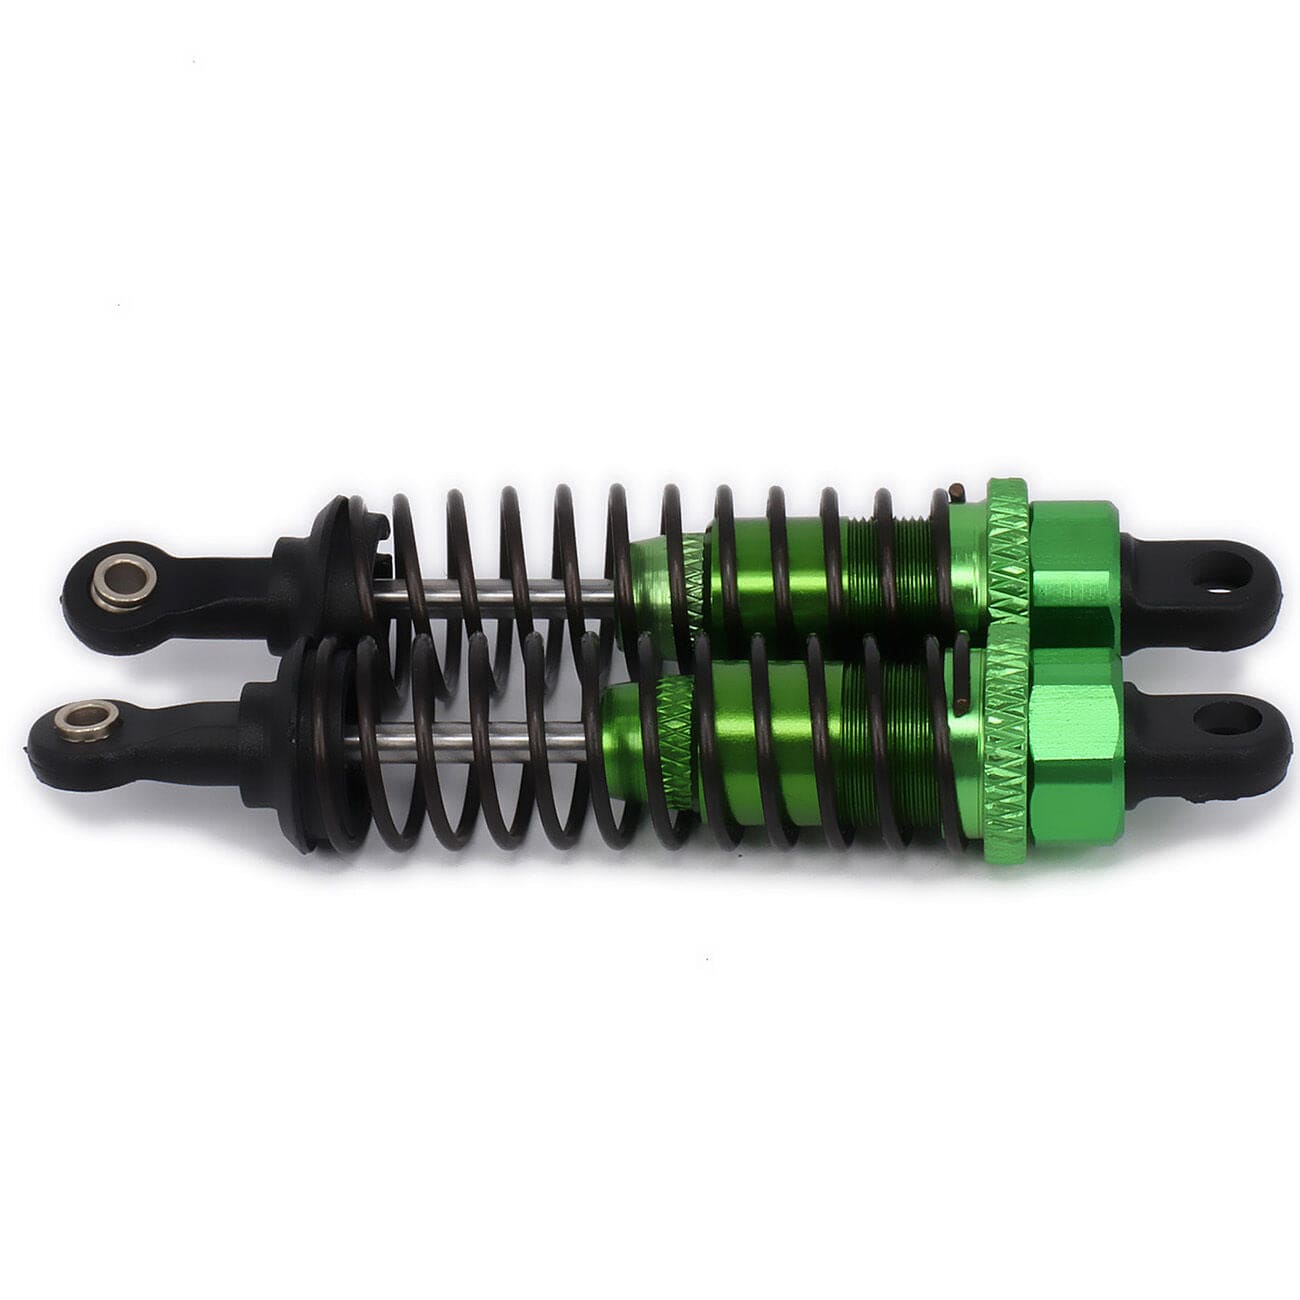 RCAWD RC CAR UPGRADE PARTS Green RCAWD 70mm Shock Absorber Damper Oil Adjustable 2PCS For Rc Car 1/16 Model Car